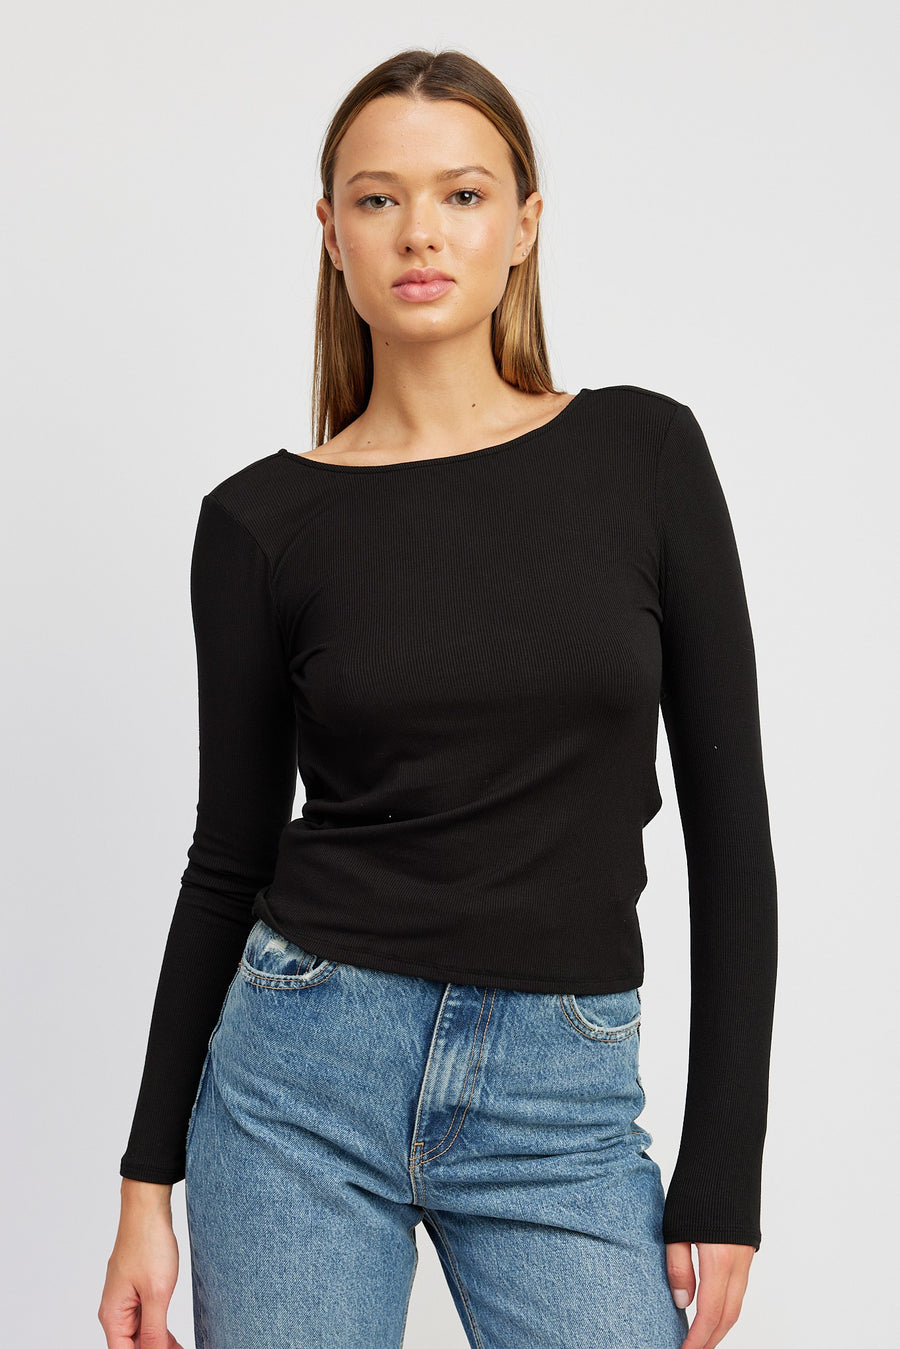 Featuring a black long sleeve with open twisted back